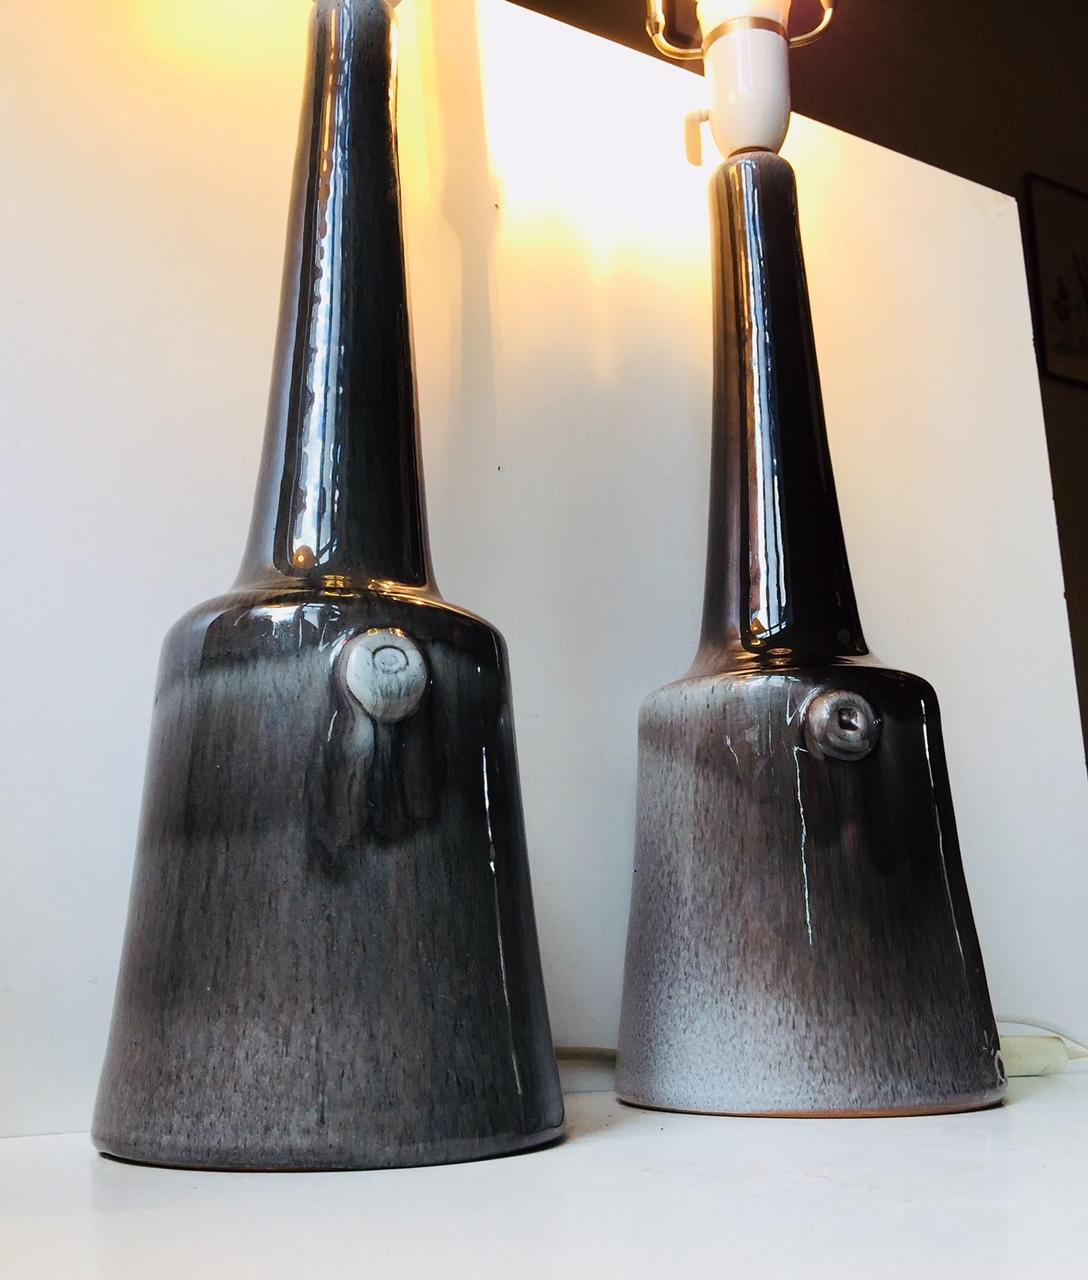 This matching pair of large and long-necked Danish Studio Pottery table lights have been finished with black and grey drip and hare's fur glazing techniques. The pieces were manufactured and designed by Holbæk Keramik in Denmark during the 1960s.